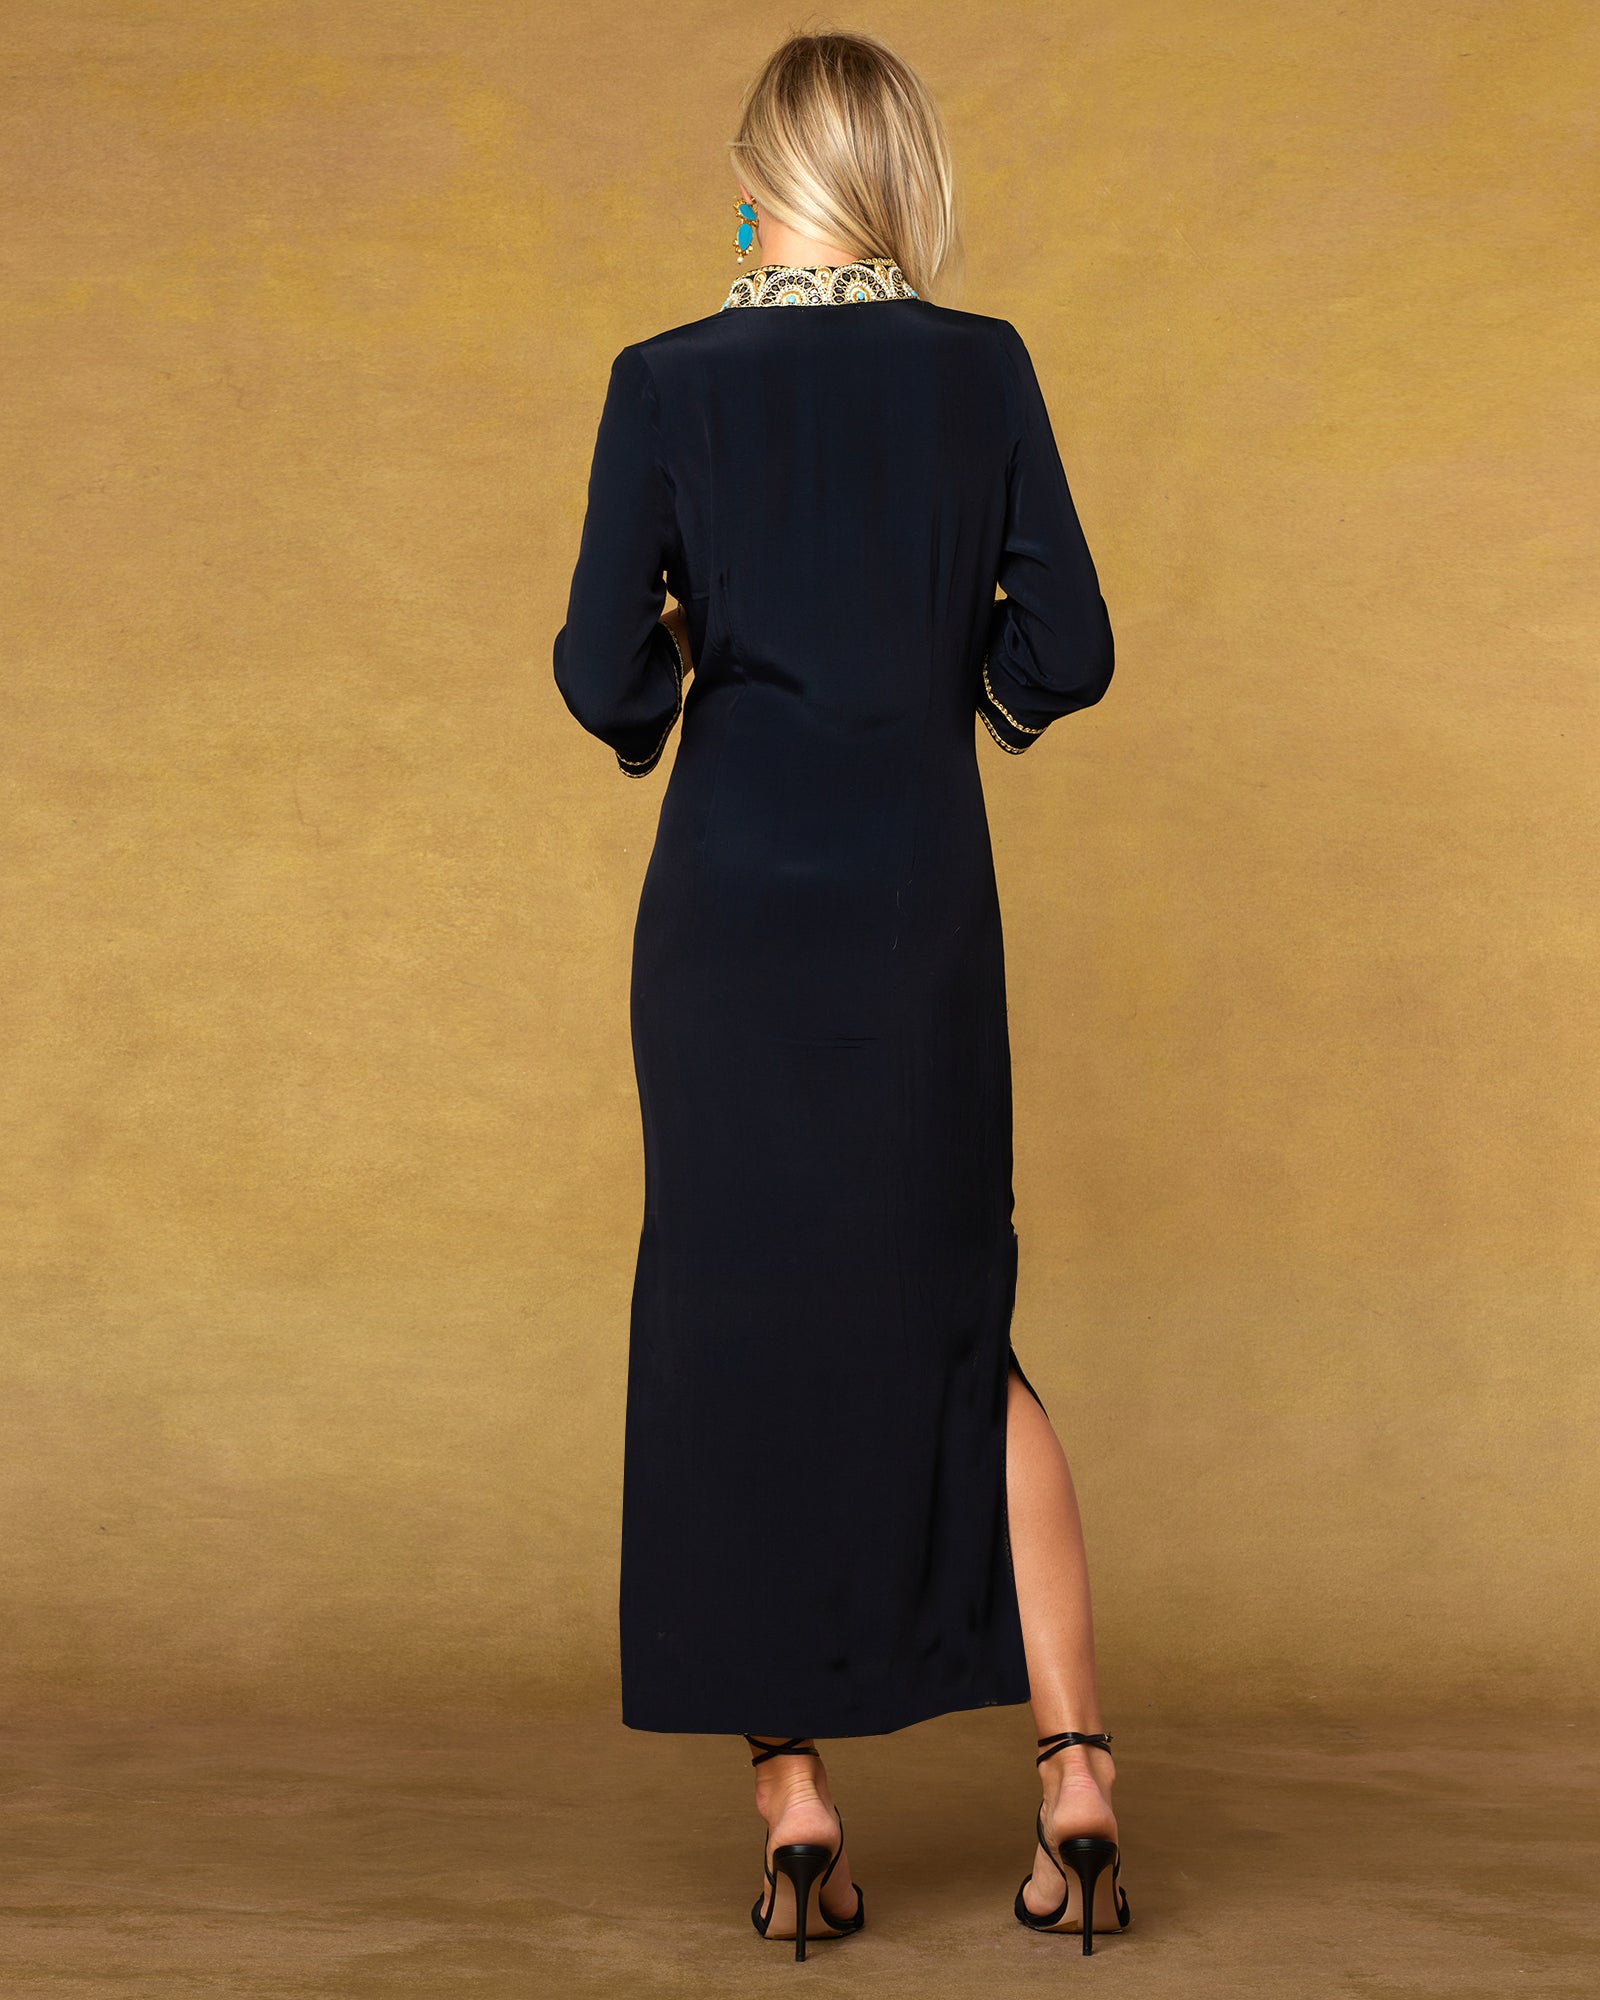 Noor Long Black Tunic Dress with Gold Embellishment with Minimalist Hem-Back View